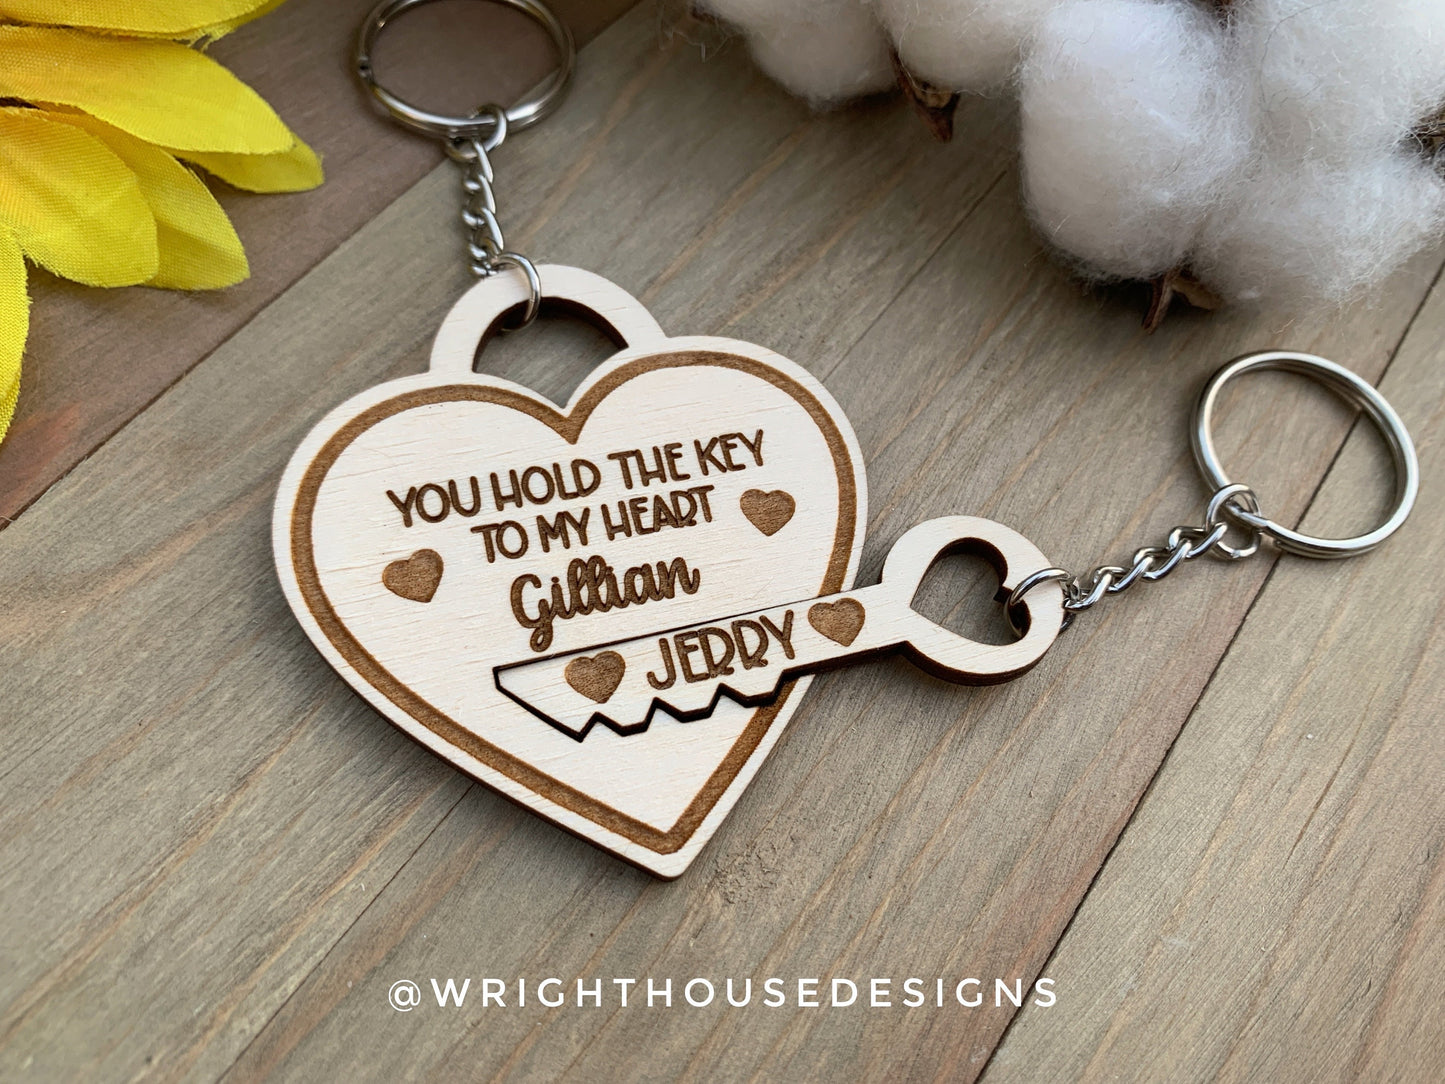 You Hold The Key To My Heart - Personalized Locket and Key Wooden Keychains For Couples On Valentine’s Day